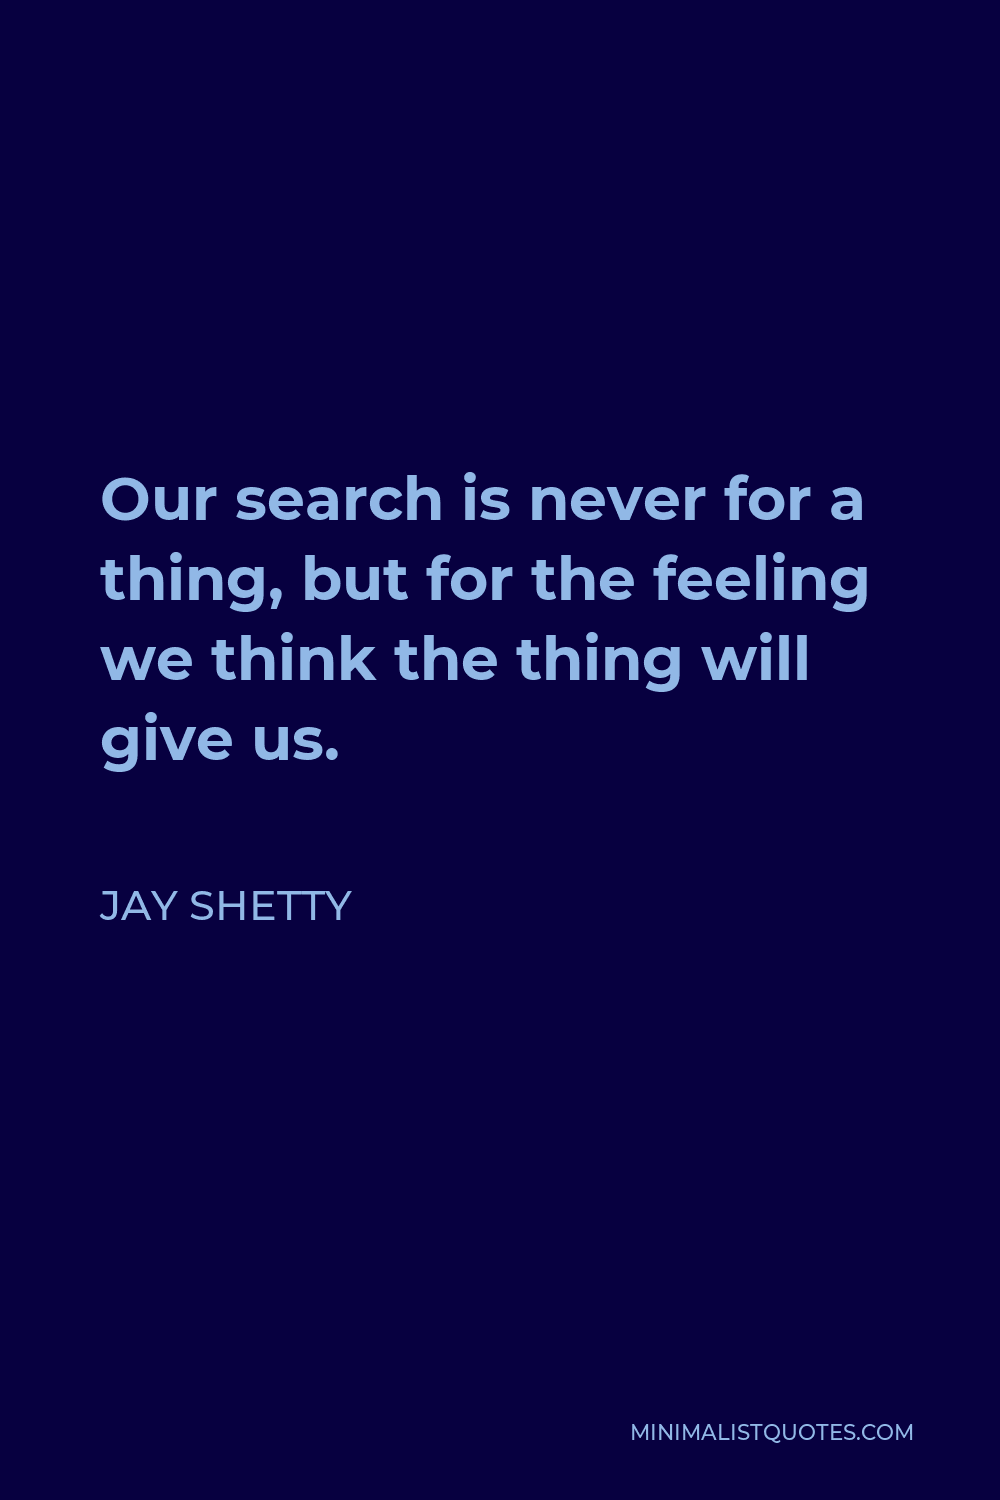 Jay Shetty Quote - Our search is never for a thing, but for the feeling we think the thing will give us.